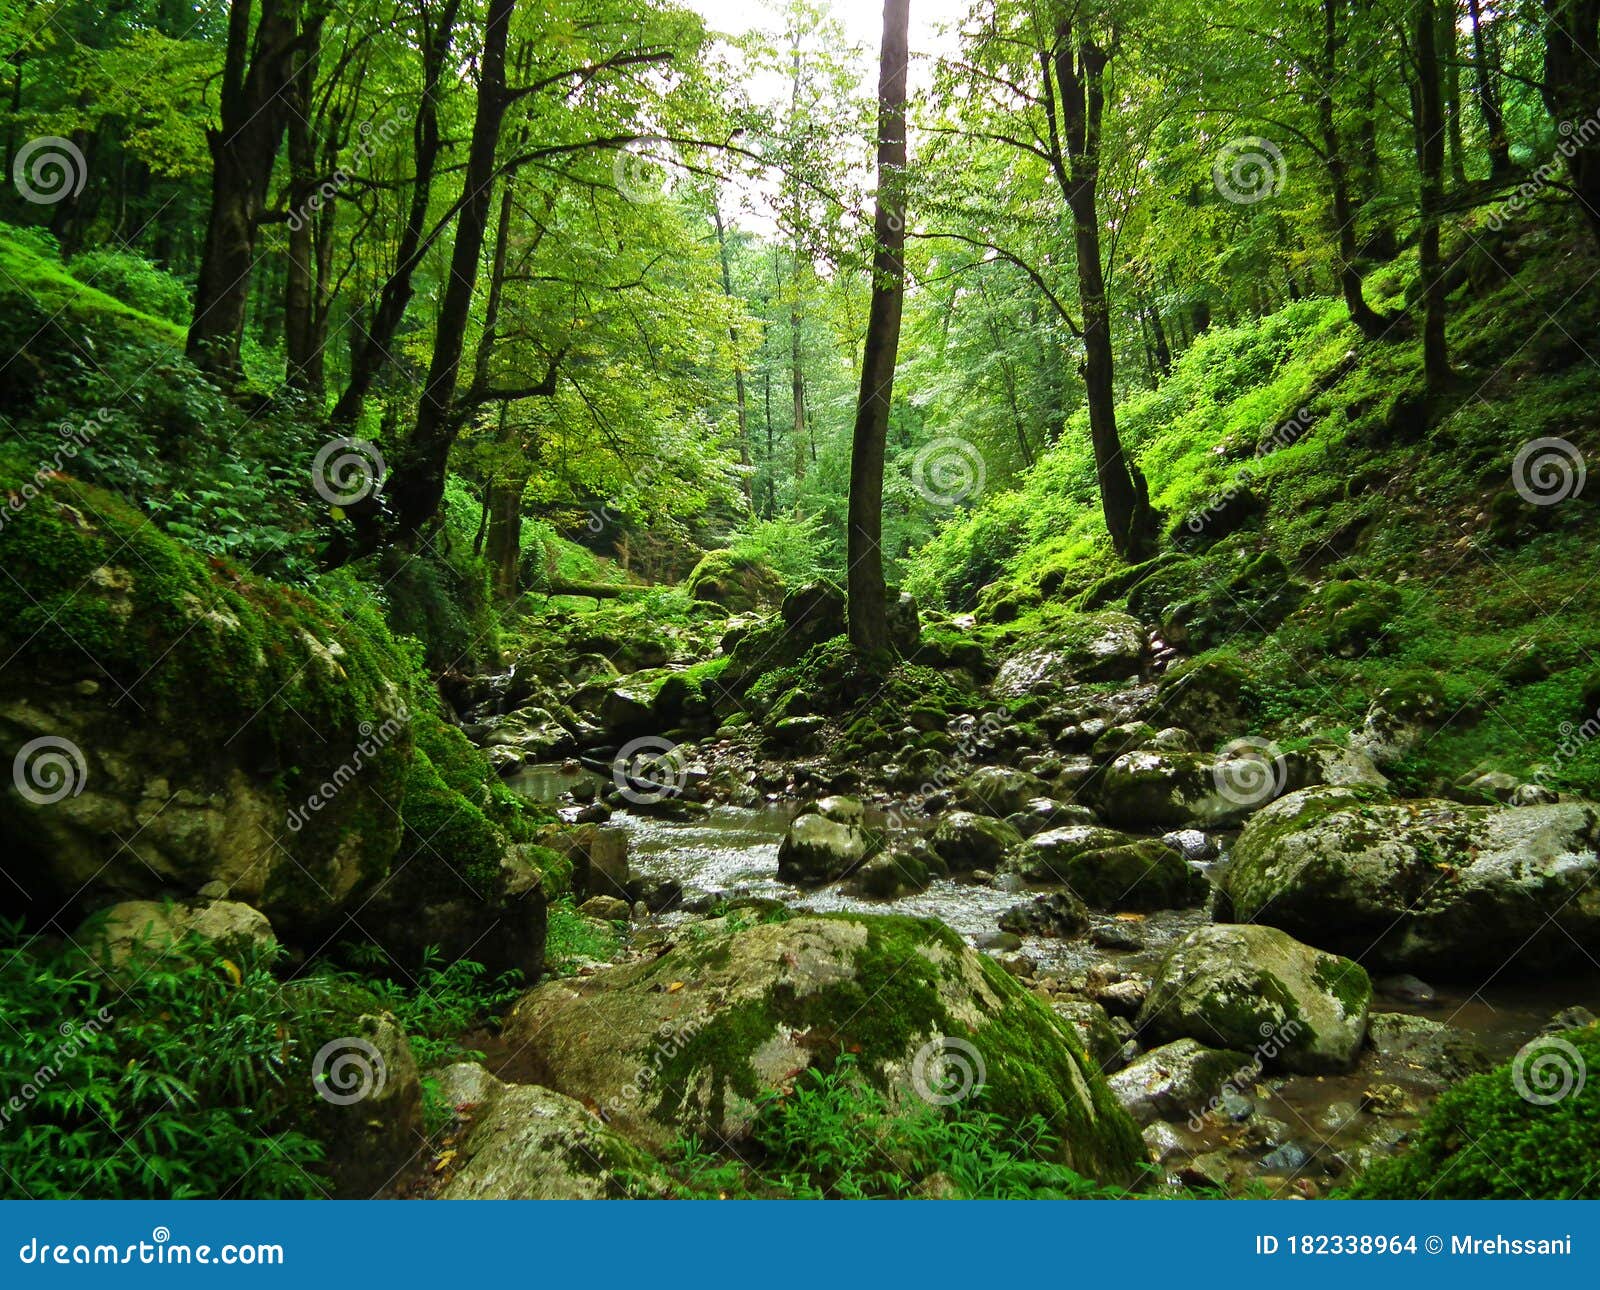 forest brook streaming in the caspian hyrcanian forests , iran